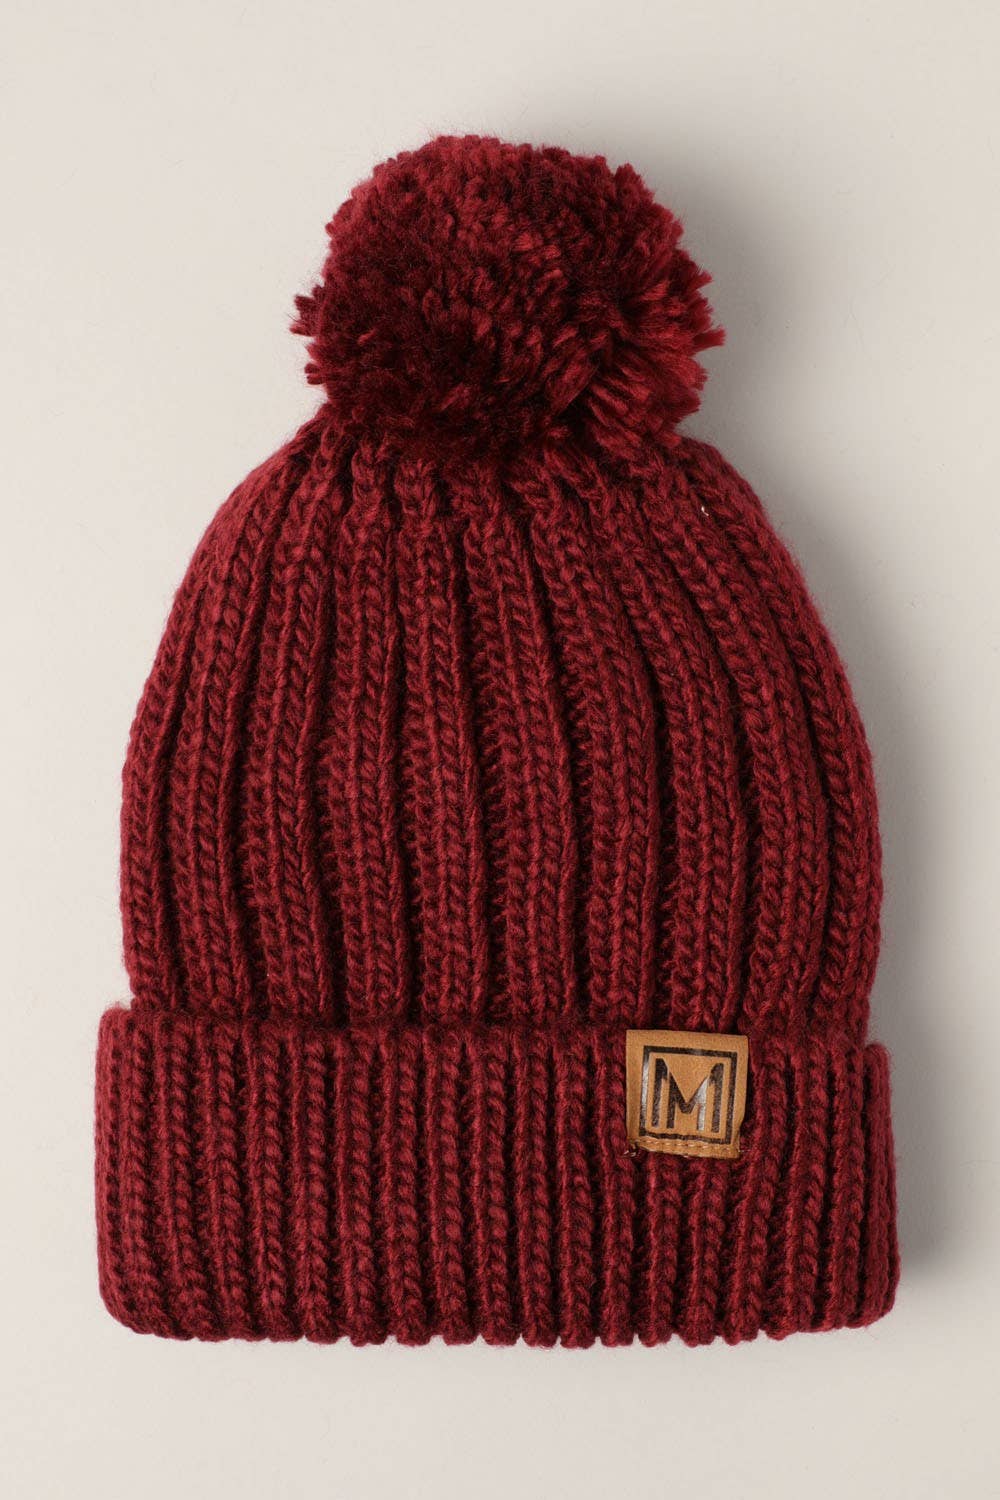 Beanie Hat, Knitted Sherpa Lined Pom, Burgundy